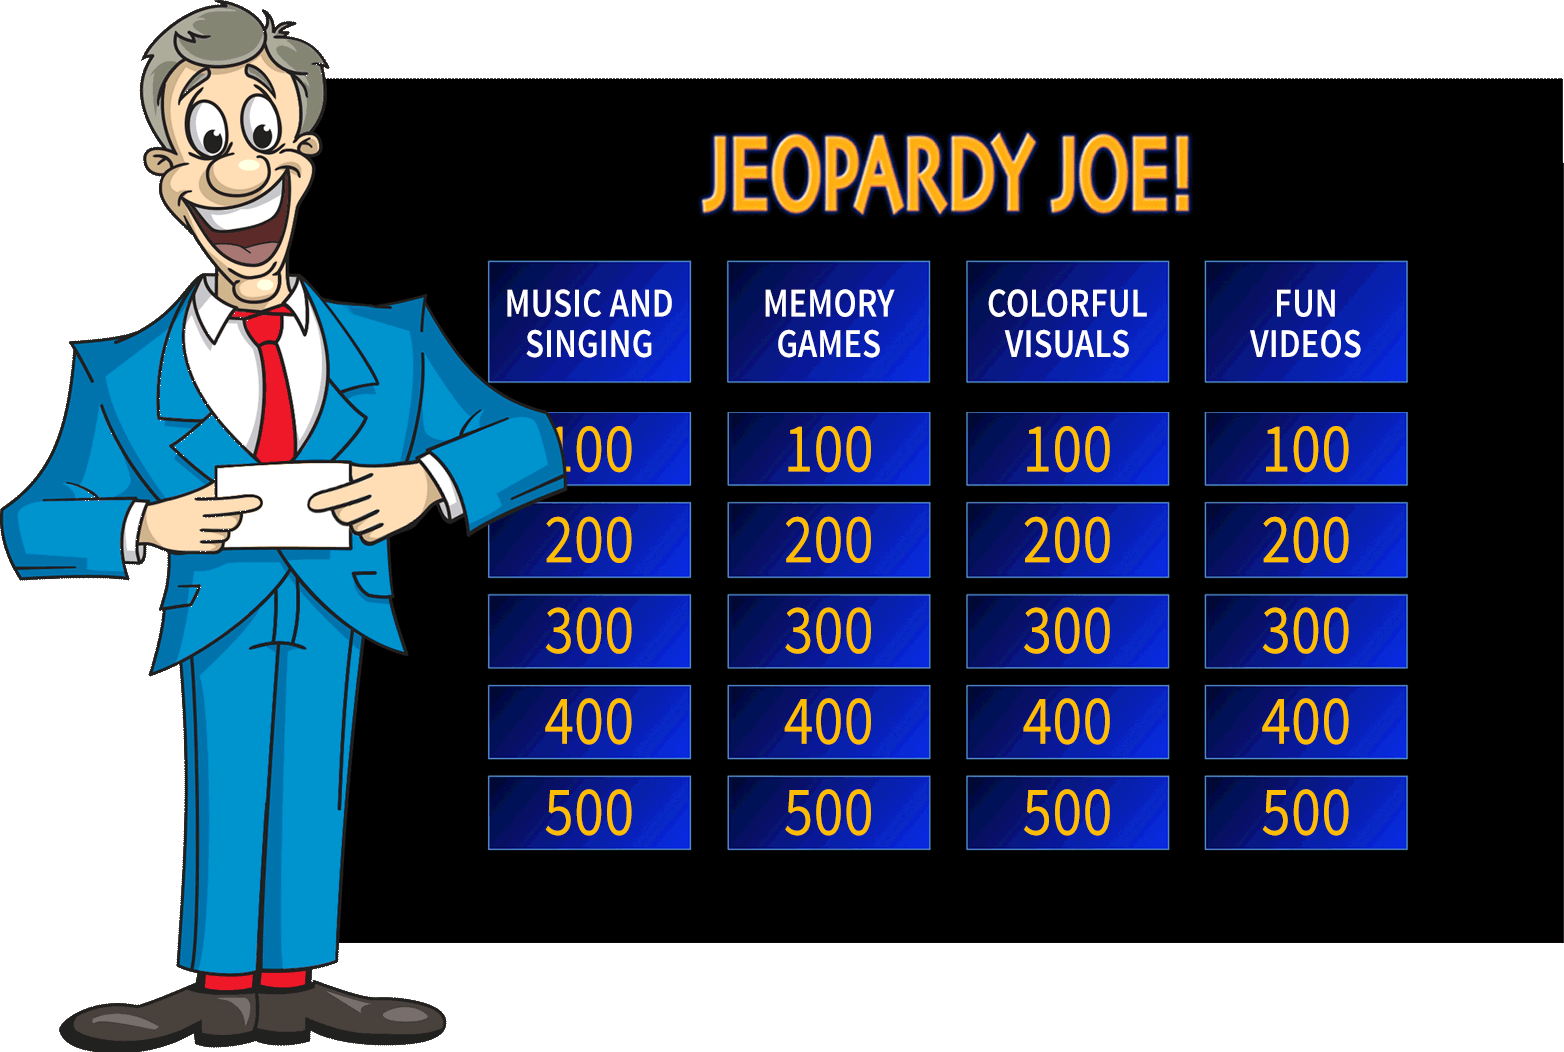 JEOPARDY JOE! - A New and Exciting Collection of Knowledge and Memory Games for Young and Old